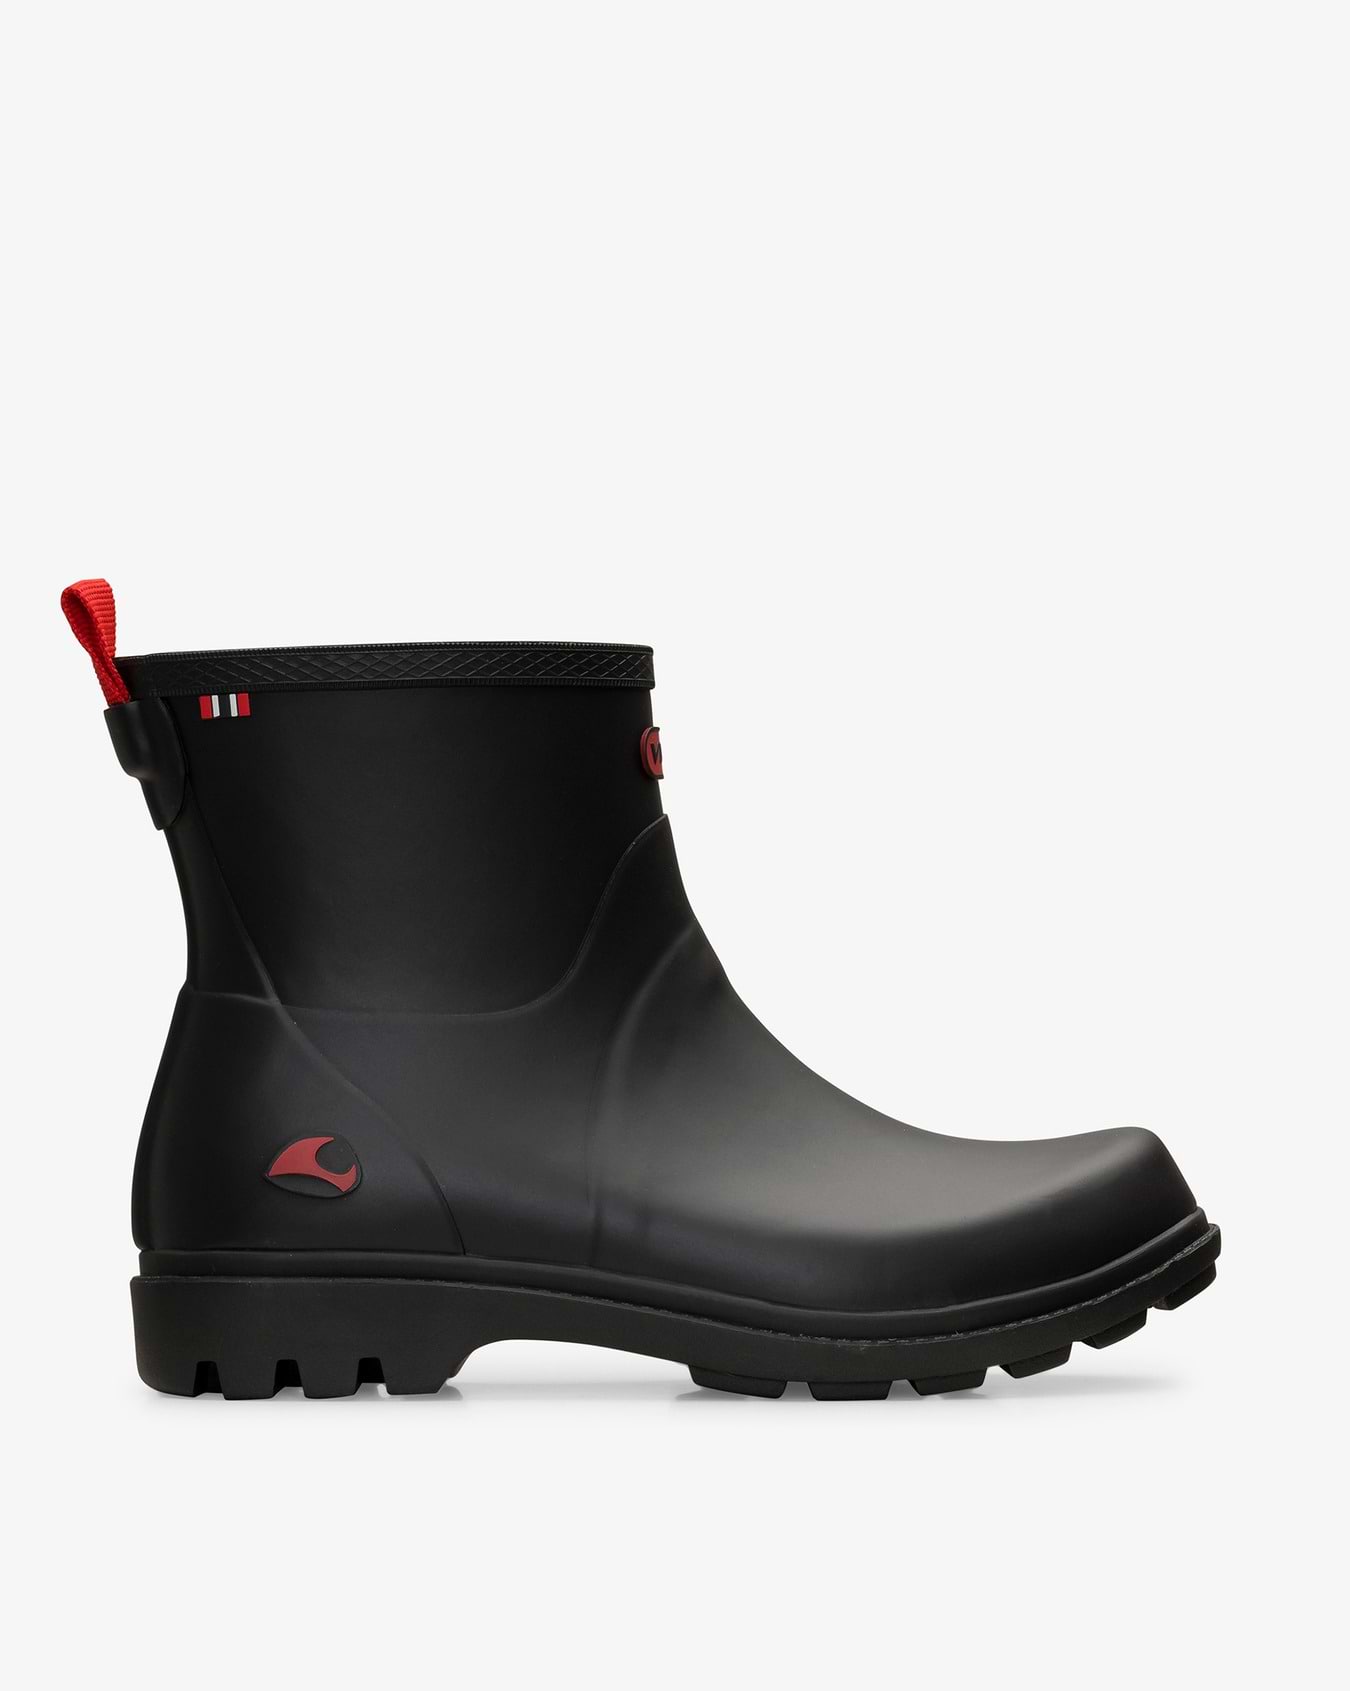 Noble Black Rubber Boot